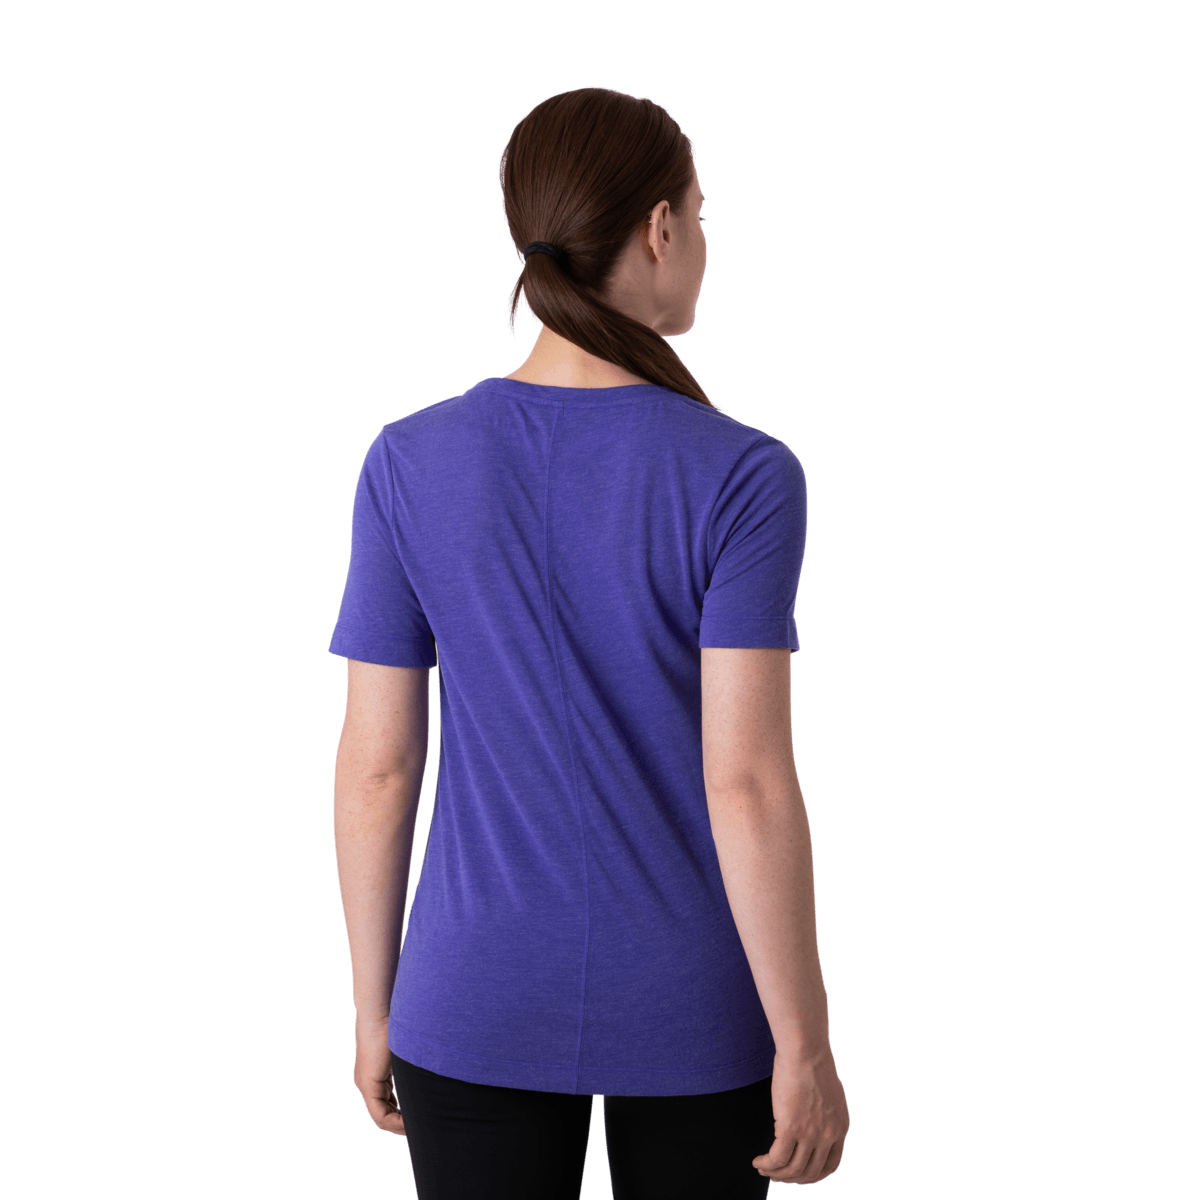 products/1200x1200png-f21_w_paseo_travel_tee_blue_violet_back_468e4684-2a6e-4fd0-b4a5-55e536a308db.png